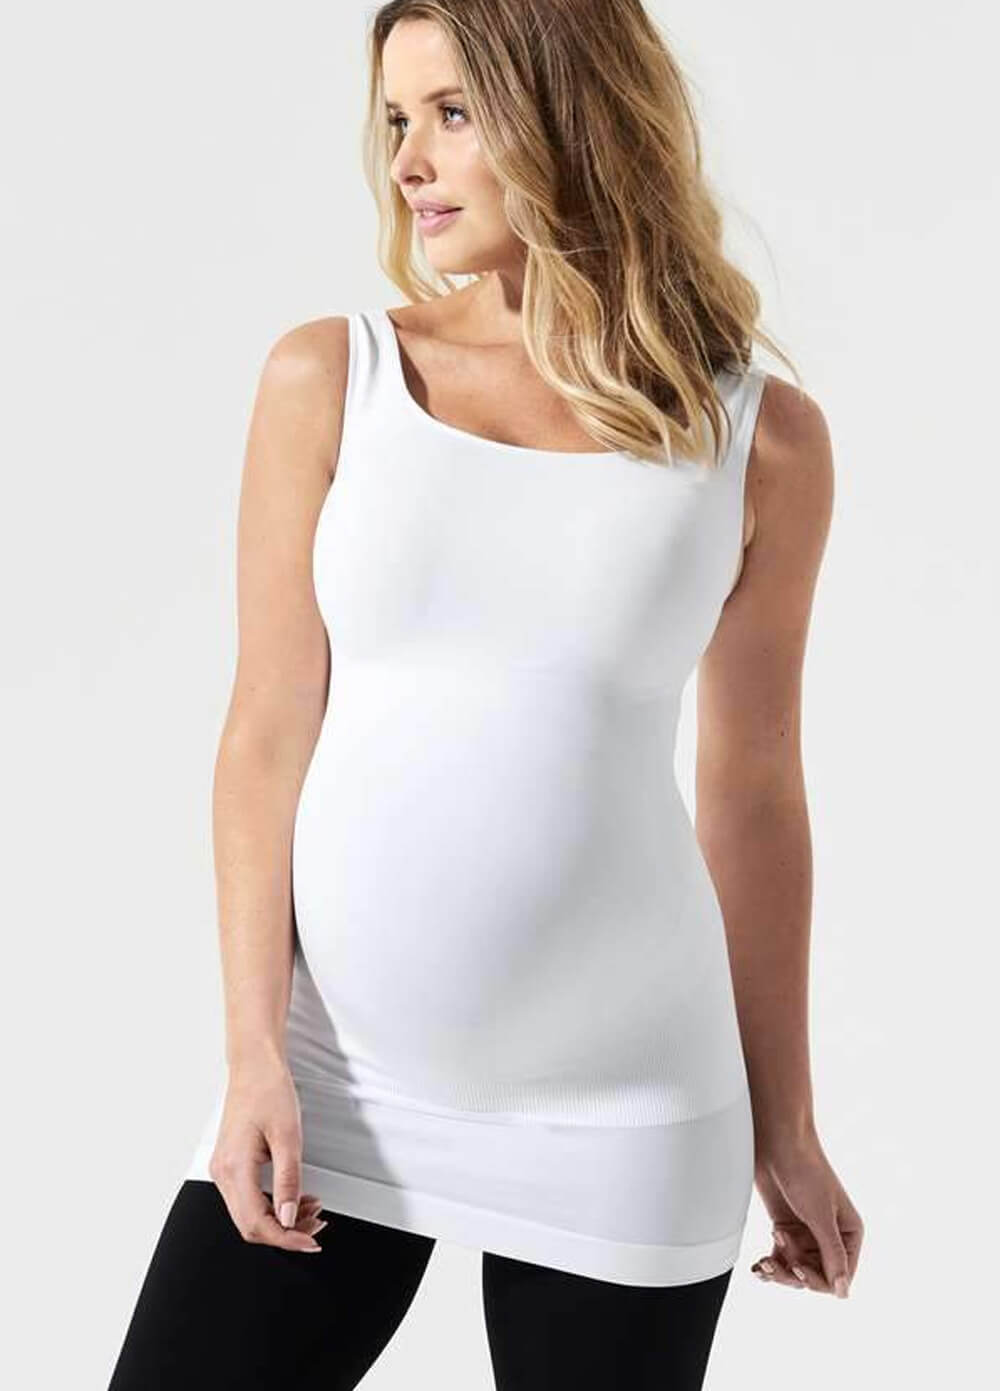 BodyStyler Maternity Belly Support Tank Top in White by Blanqi